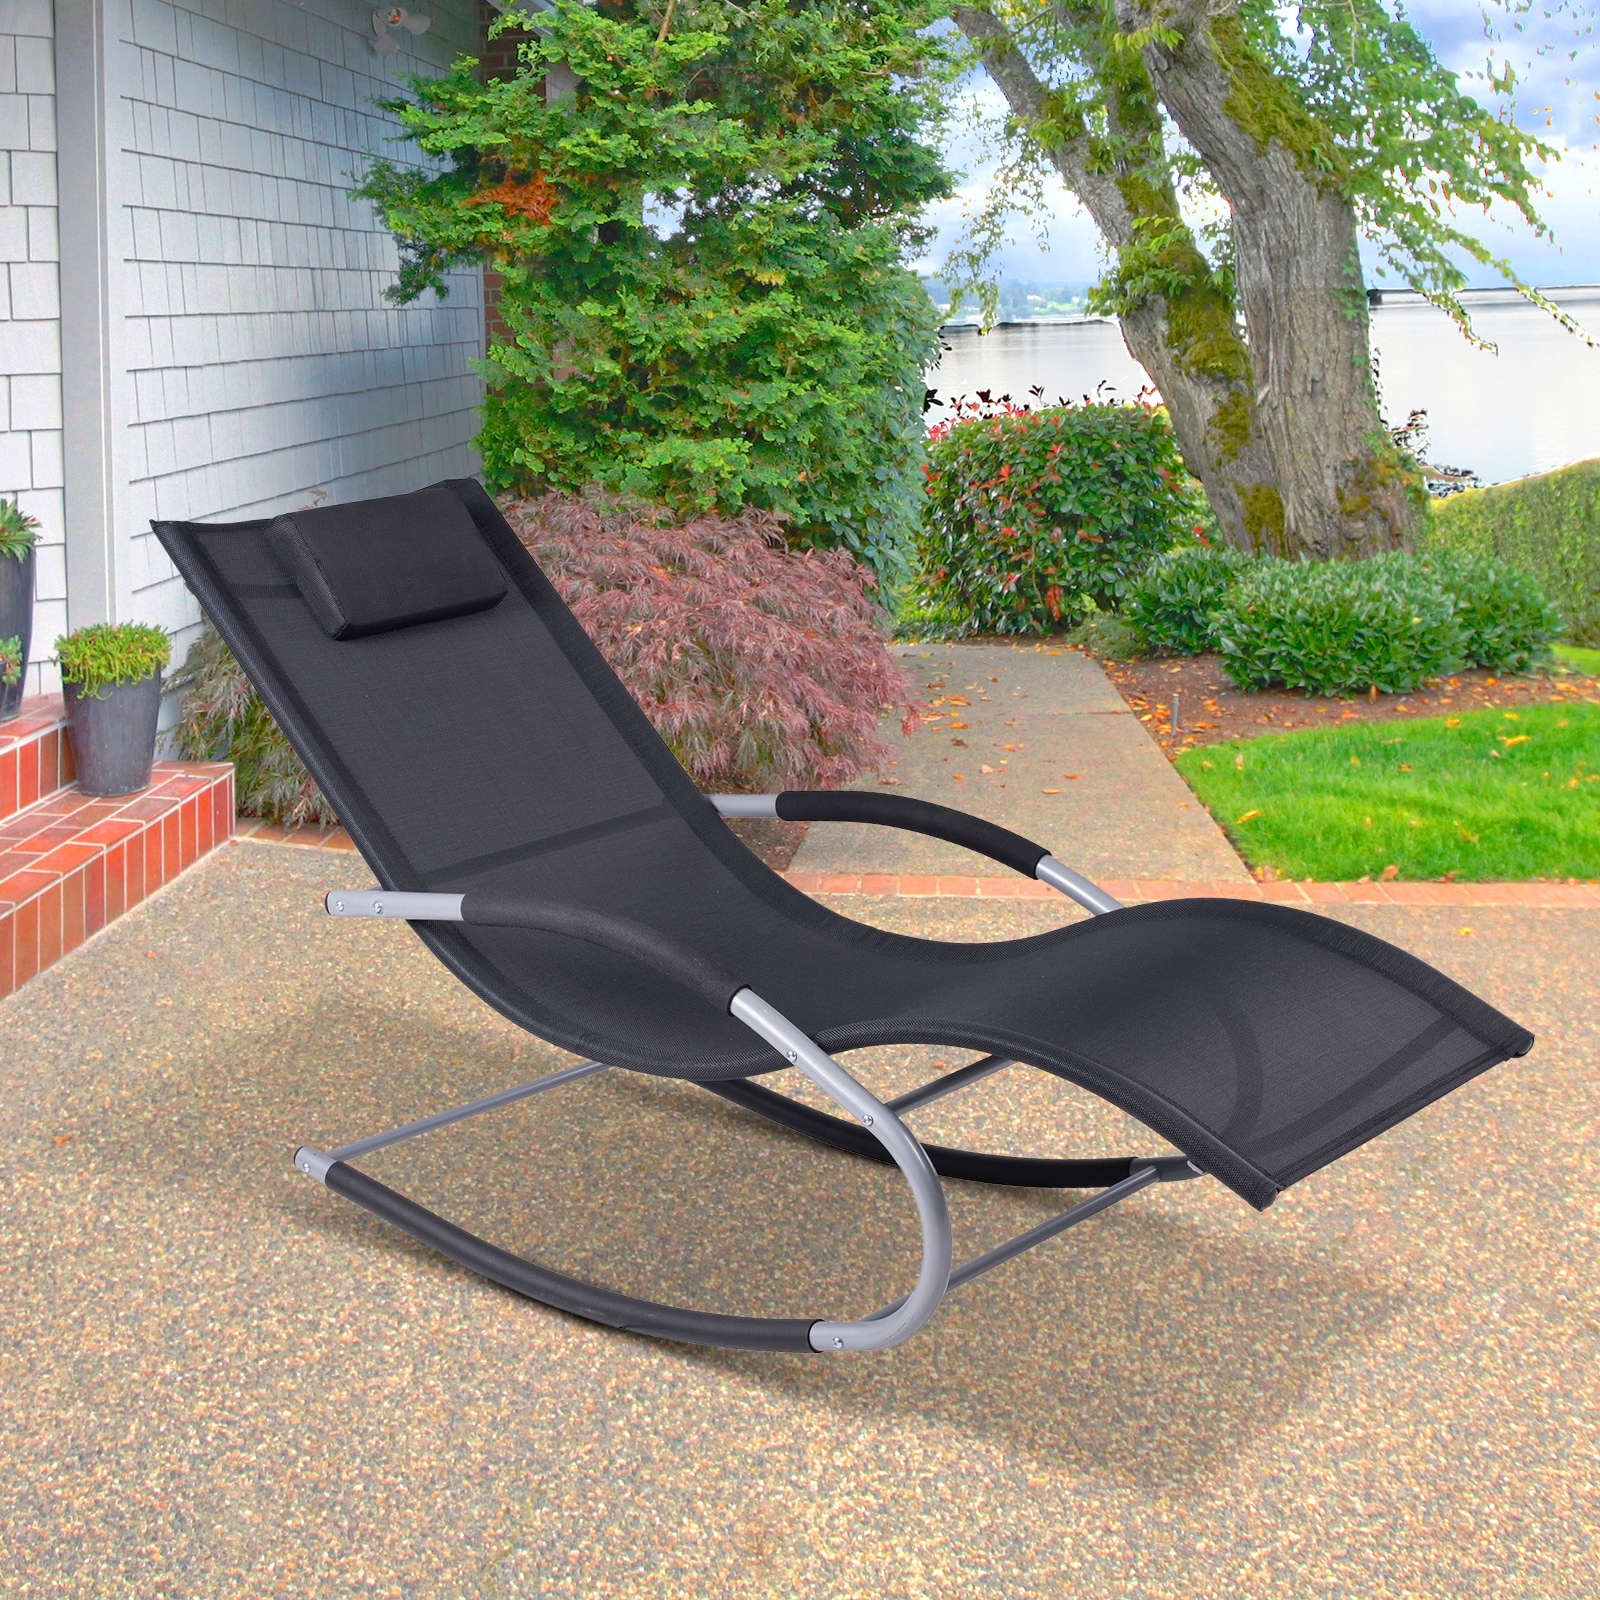 Chaise Lounge Set Of 3 Cushion Patio Chairs Table Recliner Folding Zero Gravity 